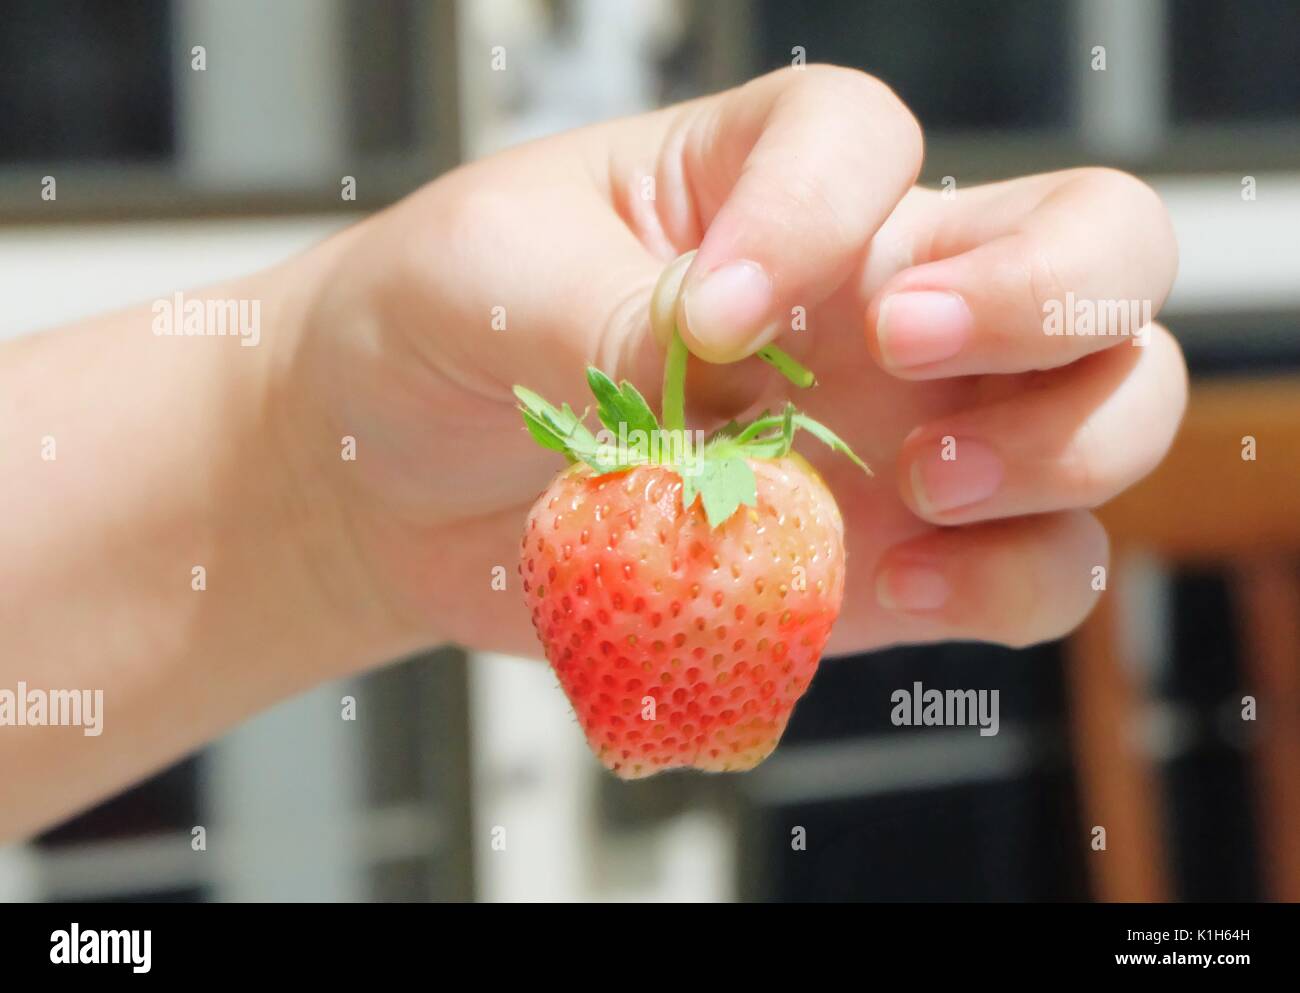 Fresh Fruit, Hand Holding Ripe and Sweet Strawberry High in Vitamin C Tablet, Essential Nutrient for Life. Stock Photo